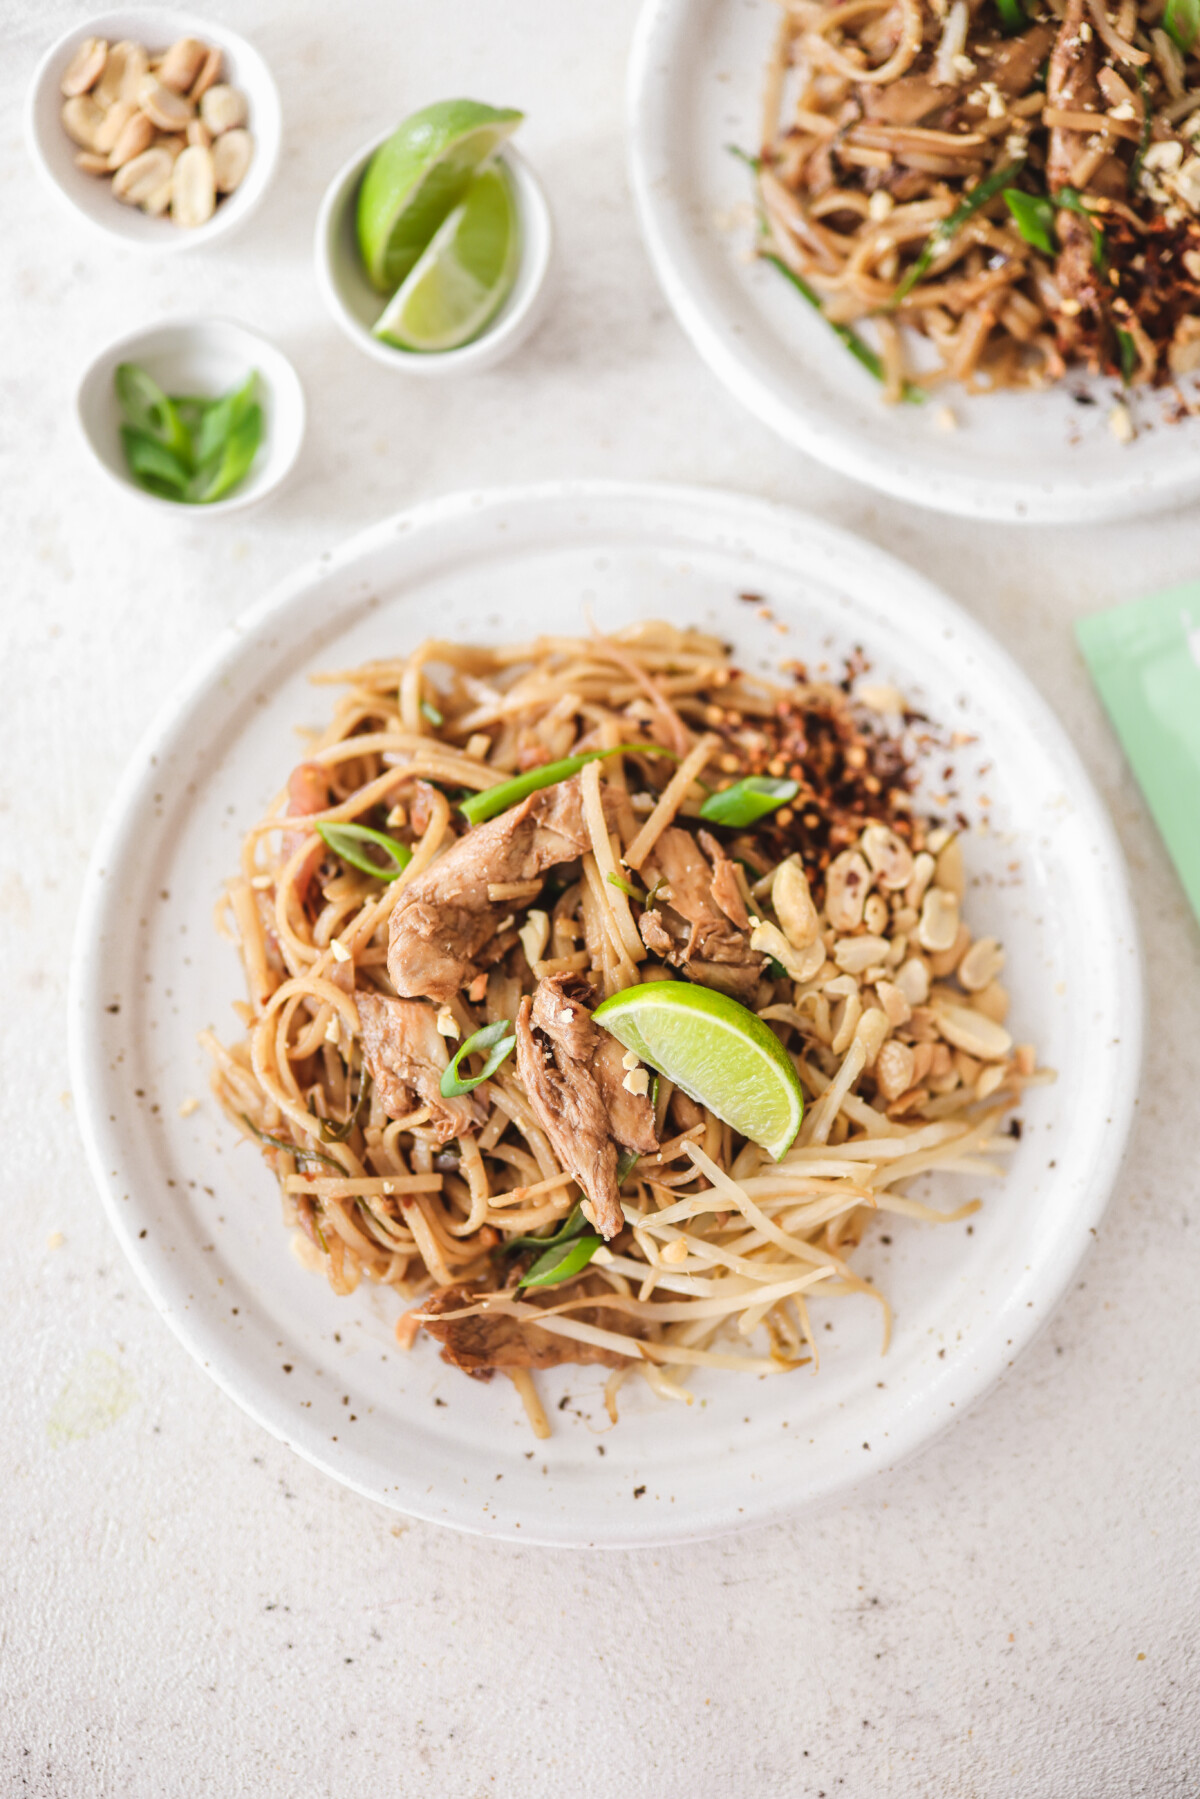 an Asian noodle dish on a white plate topped with peanuts and lime wedges.